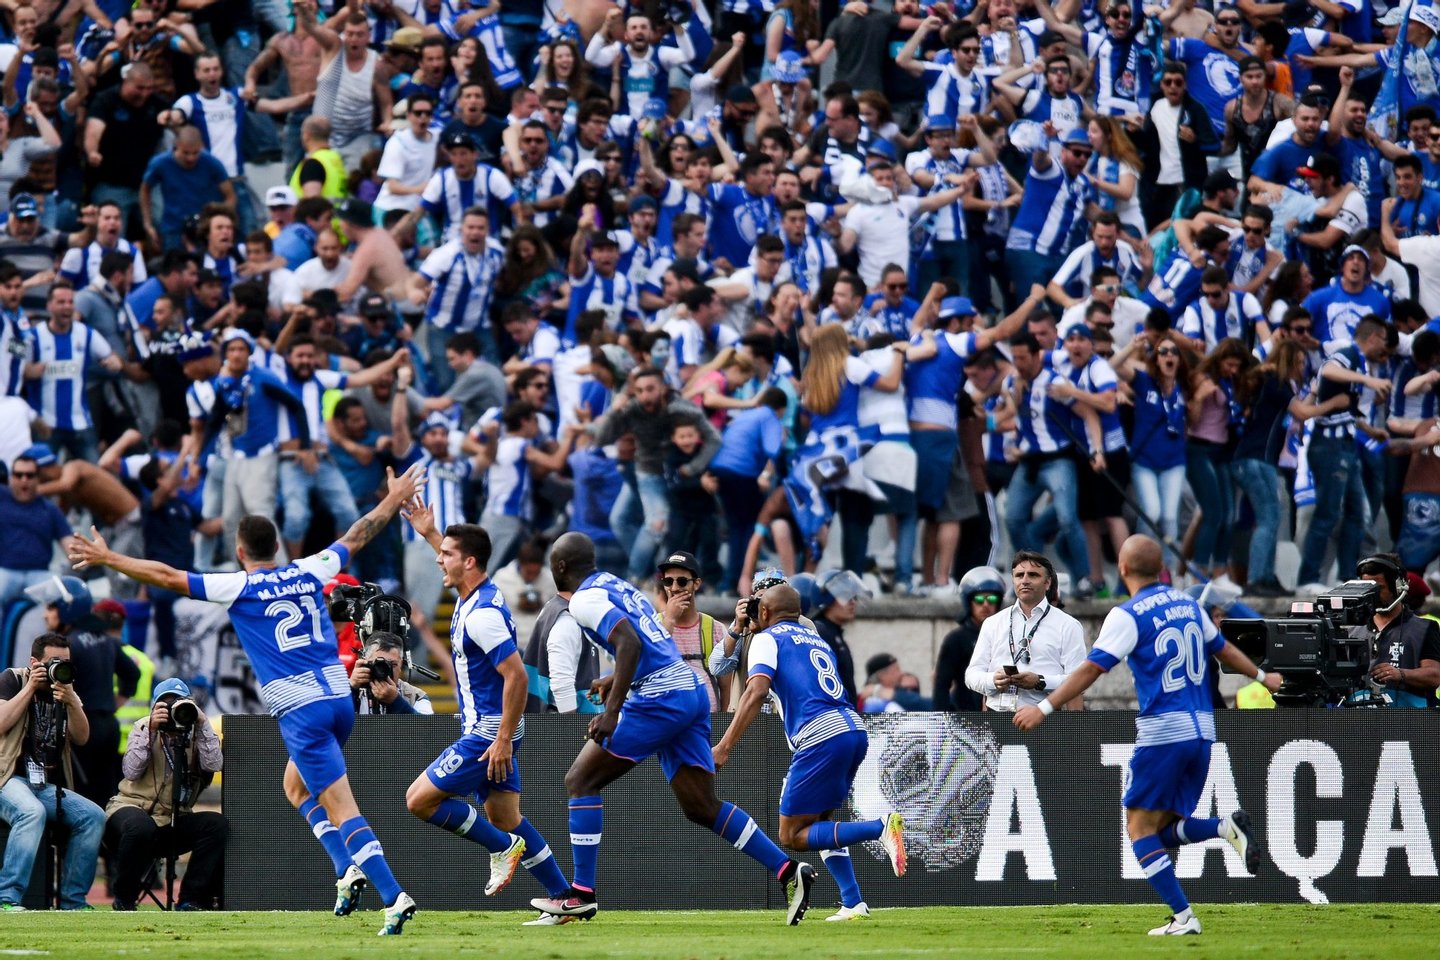 Porto's forward Andre Silva (2L) celebrates with his teammates after scored against SC Braga during the Portuguese Cup final football match FC Porto vs SC Braga at Jamor stadium in Oeiras, outskirts of Lisbon on May 22, 2016. / AFP / PATRICIA DE MELO MOREIRA (Photo credit should read PATRICIA DE MELO MOREIRA/AFP/Getty Images)